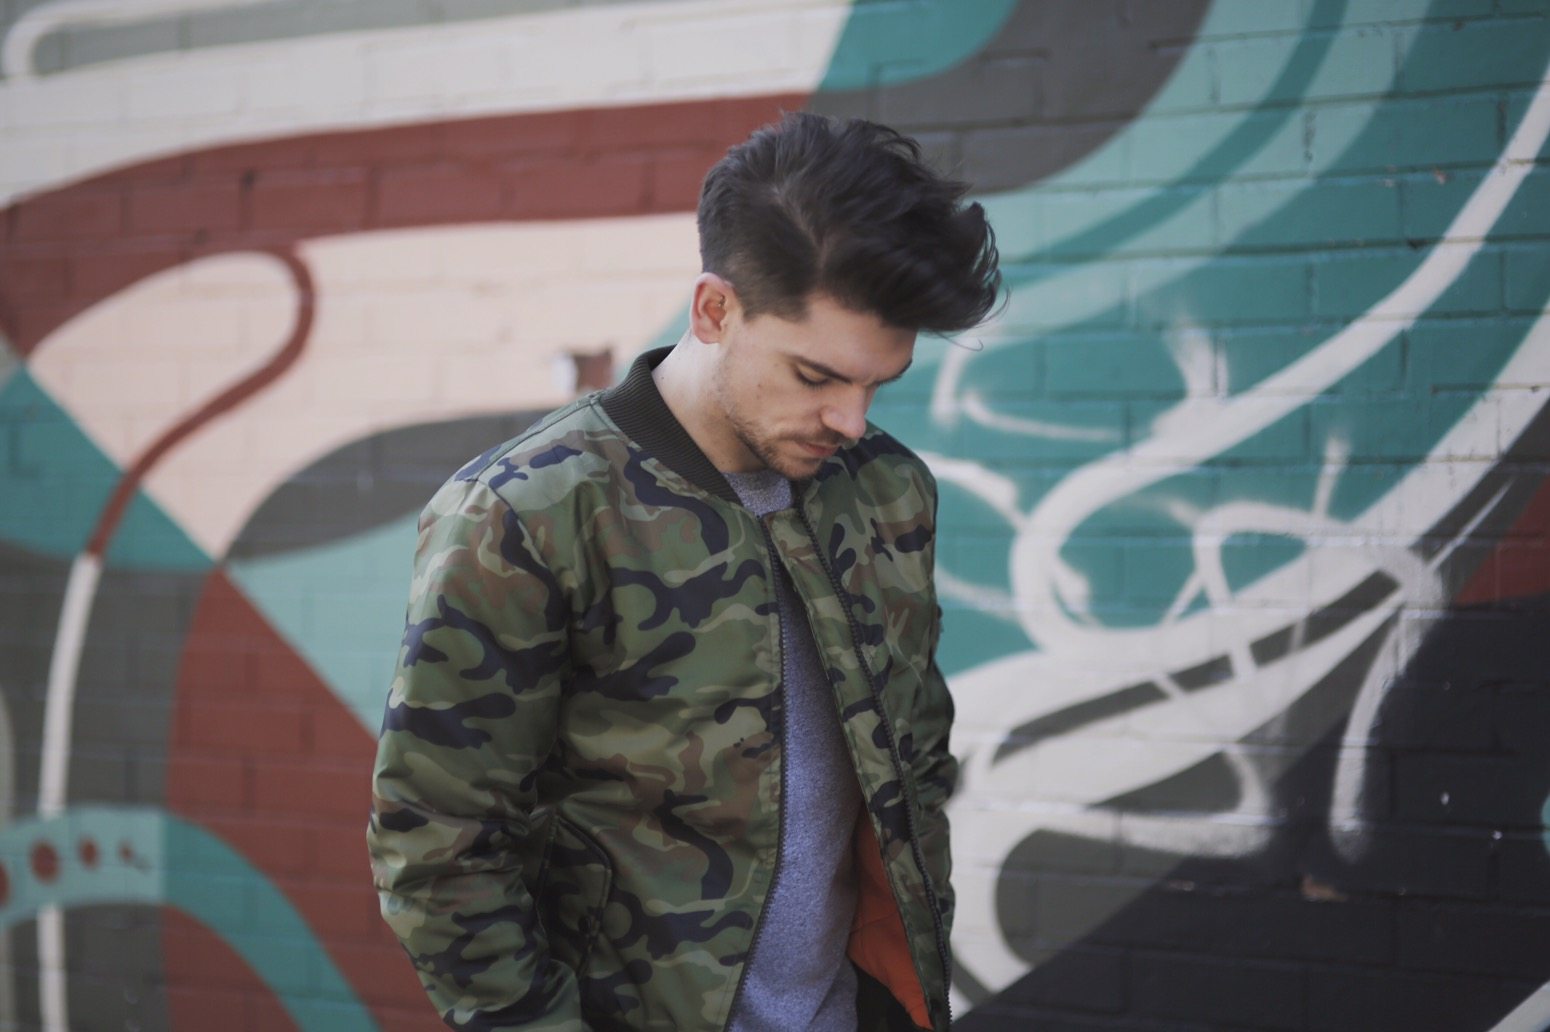 Robin-James-Man-For-Himself-Camouflage-Bomber-OOTD-quiff